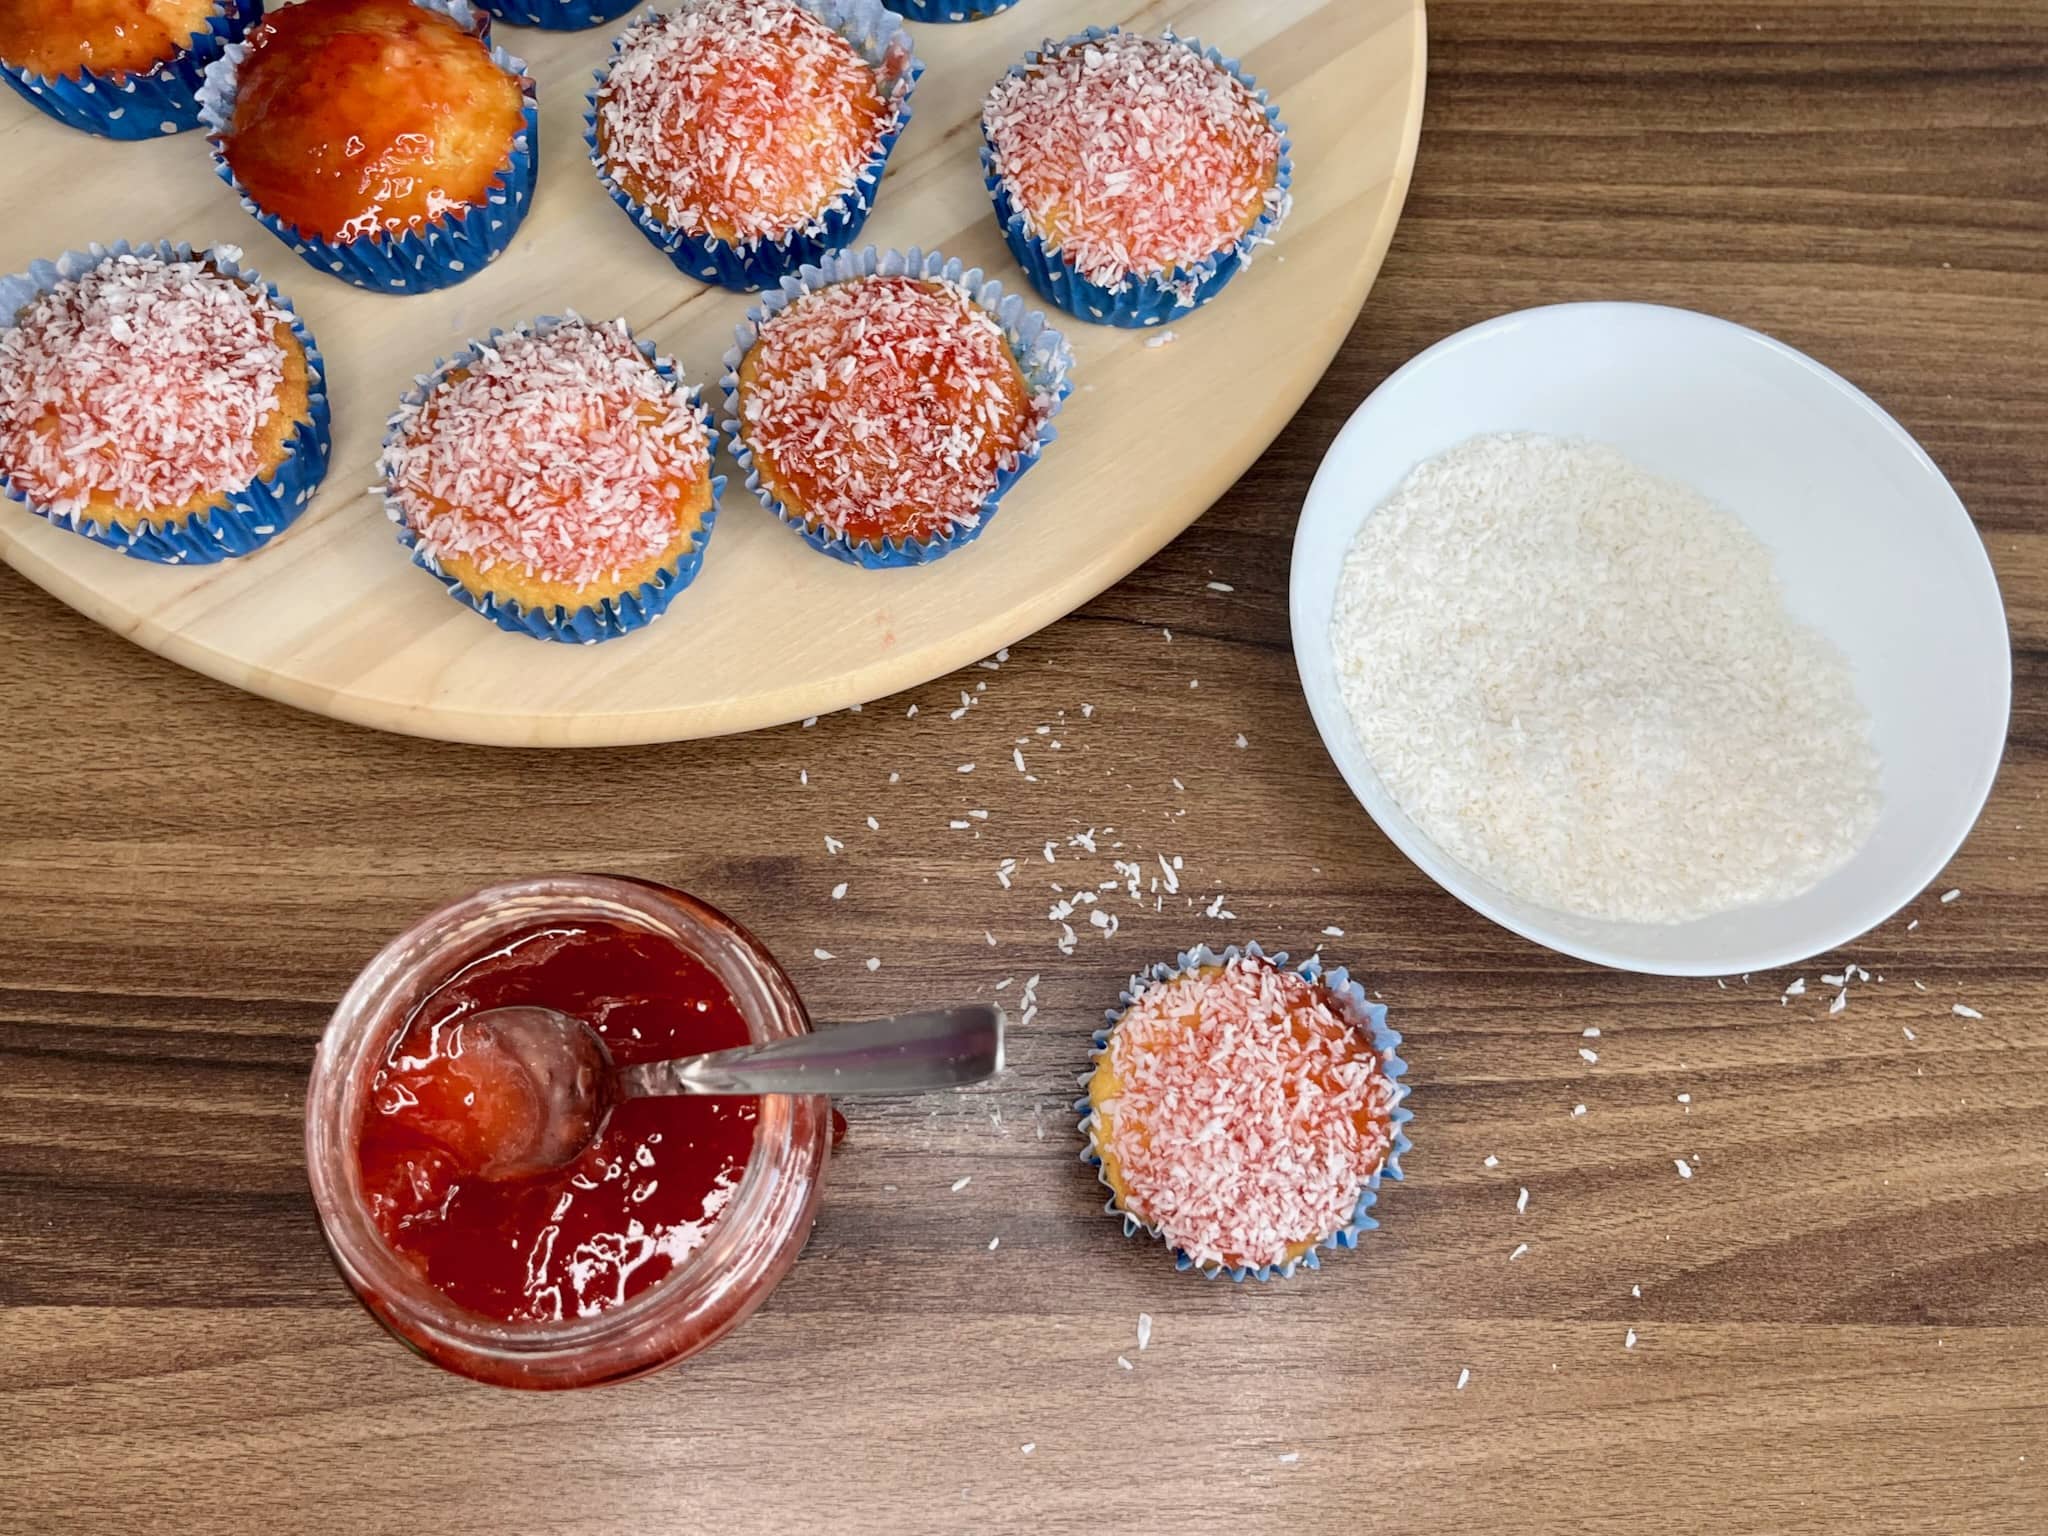 Sprinkle coconut flakes on top of muffins that have been brushed with strawberry jam.